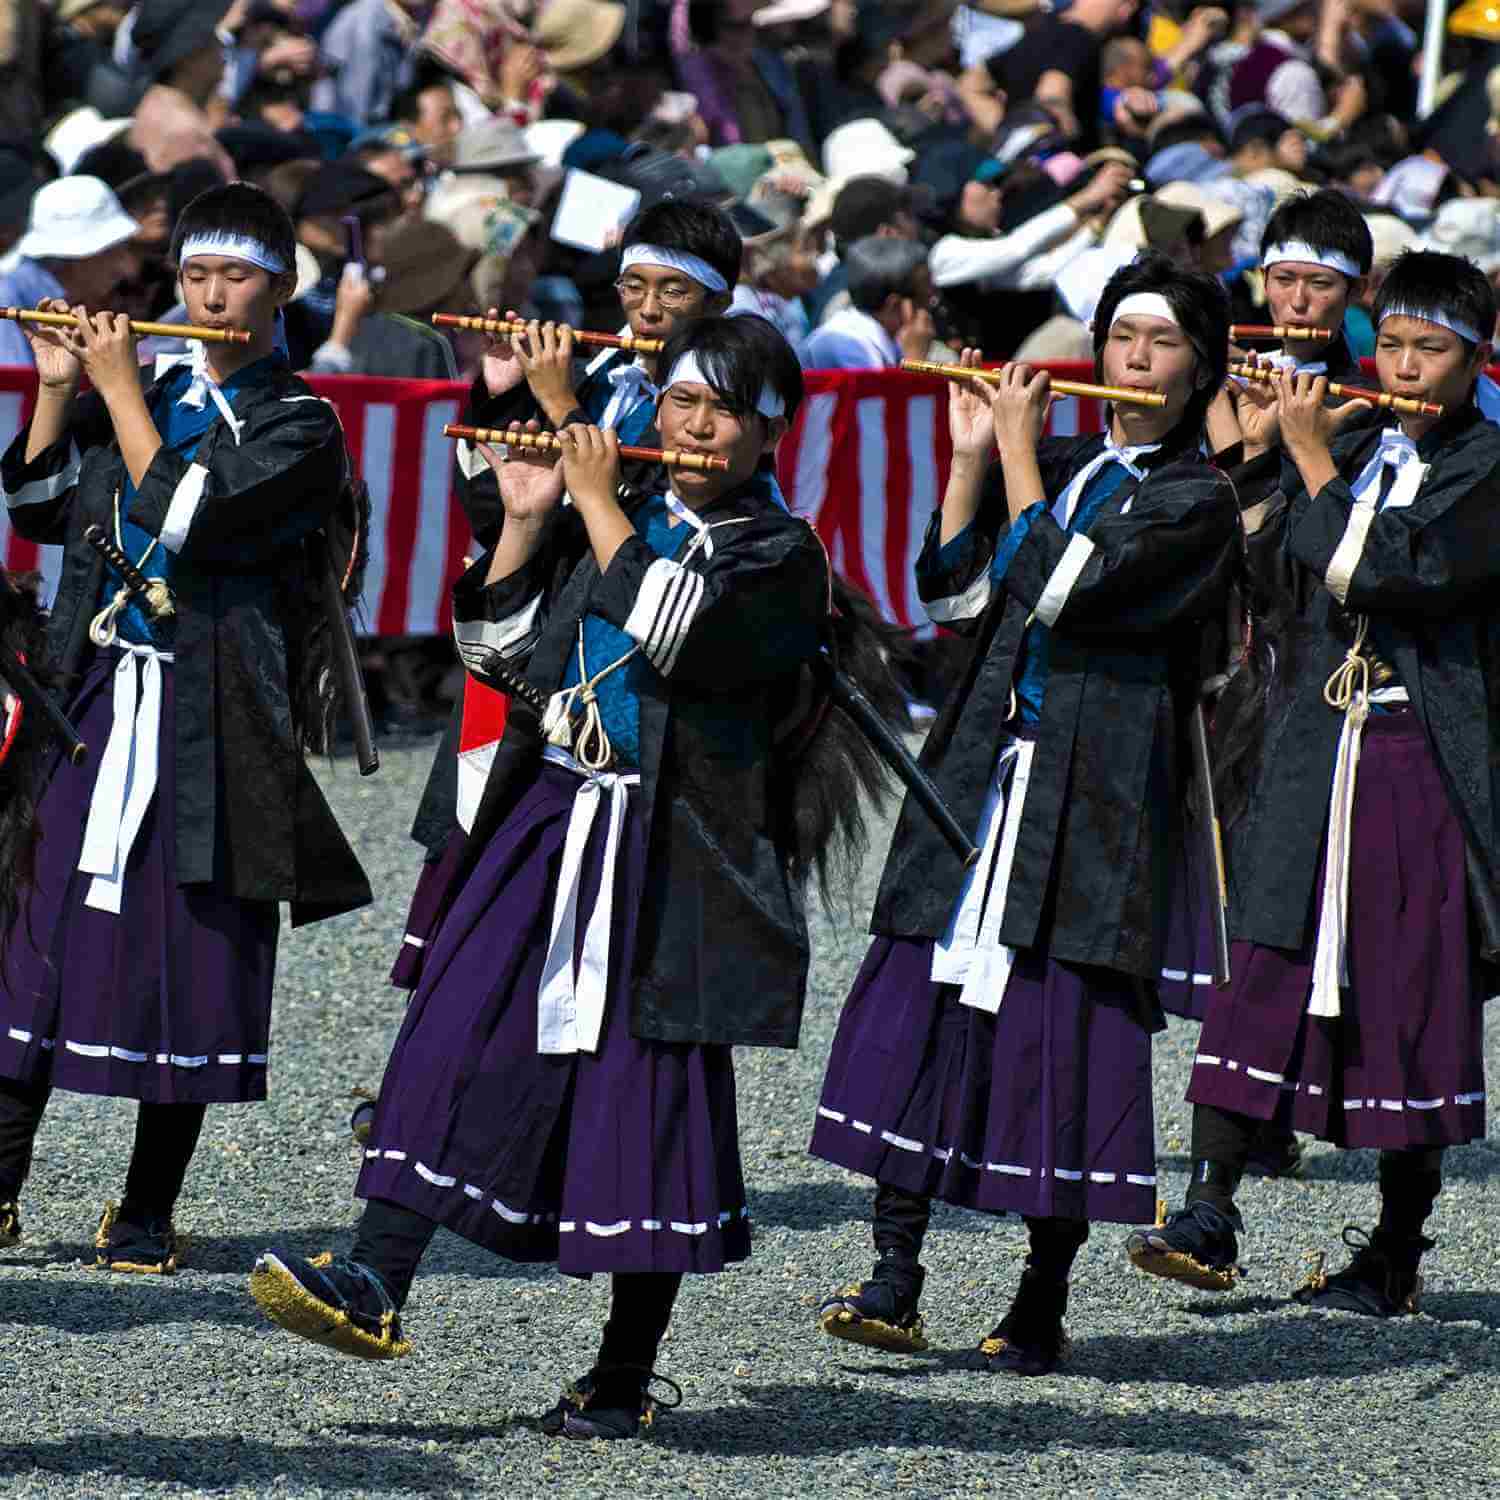 The Jidai Matsuri Festival is a traditional Japanese festival held annually on October 22 in Kyoto, Japan = Shutterstock 9